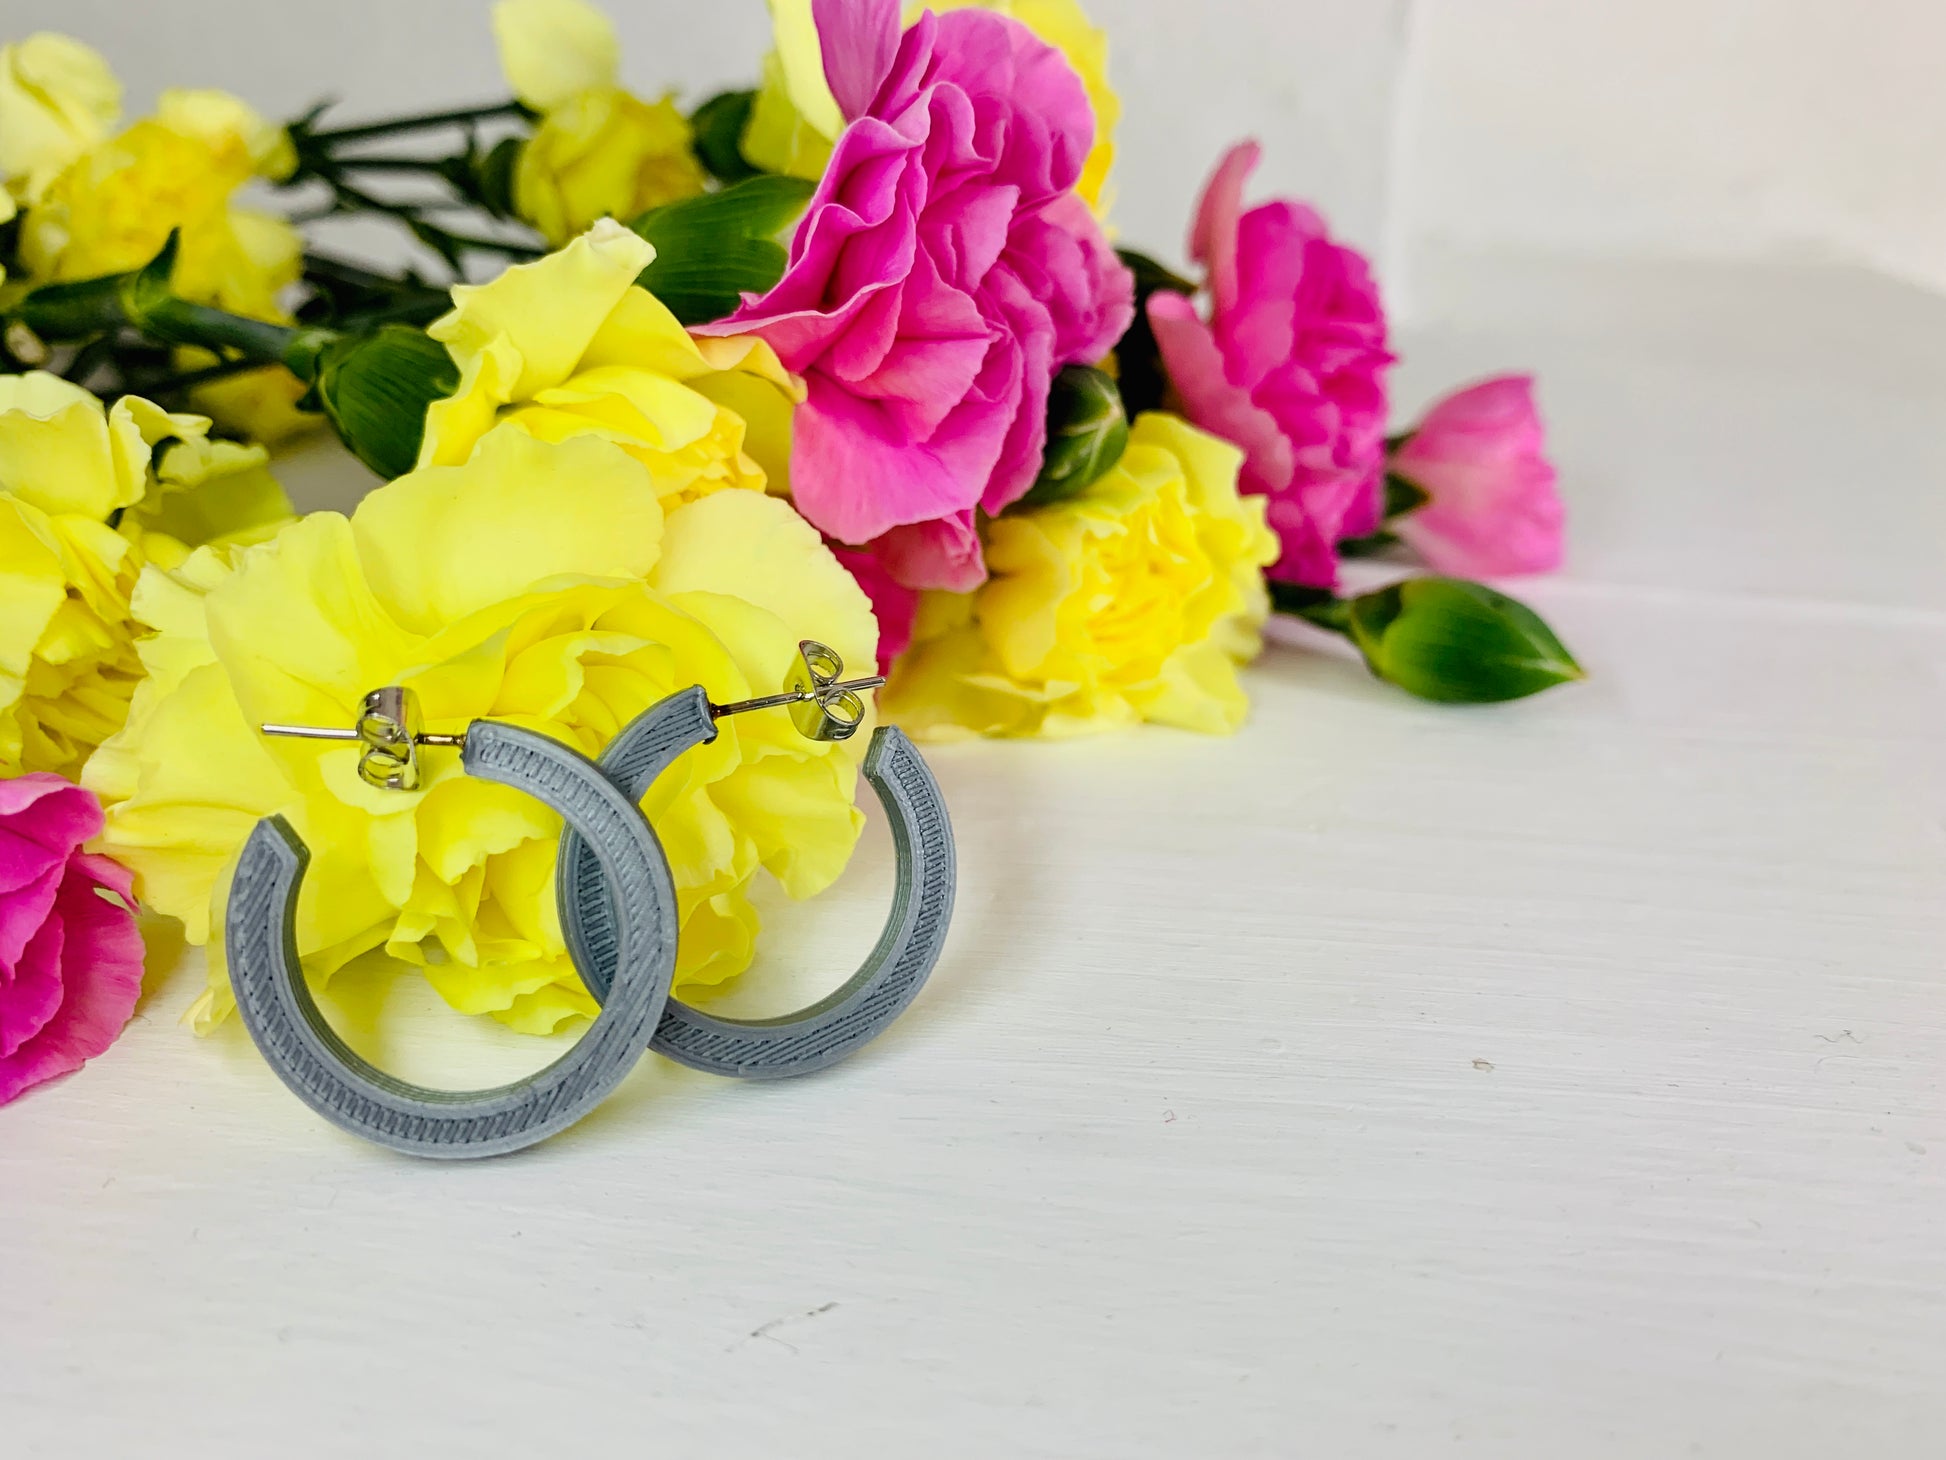 Resting in front of yellow and pink carnations are two 3D printed hoops. They are silver and chunky in their shape. 